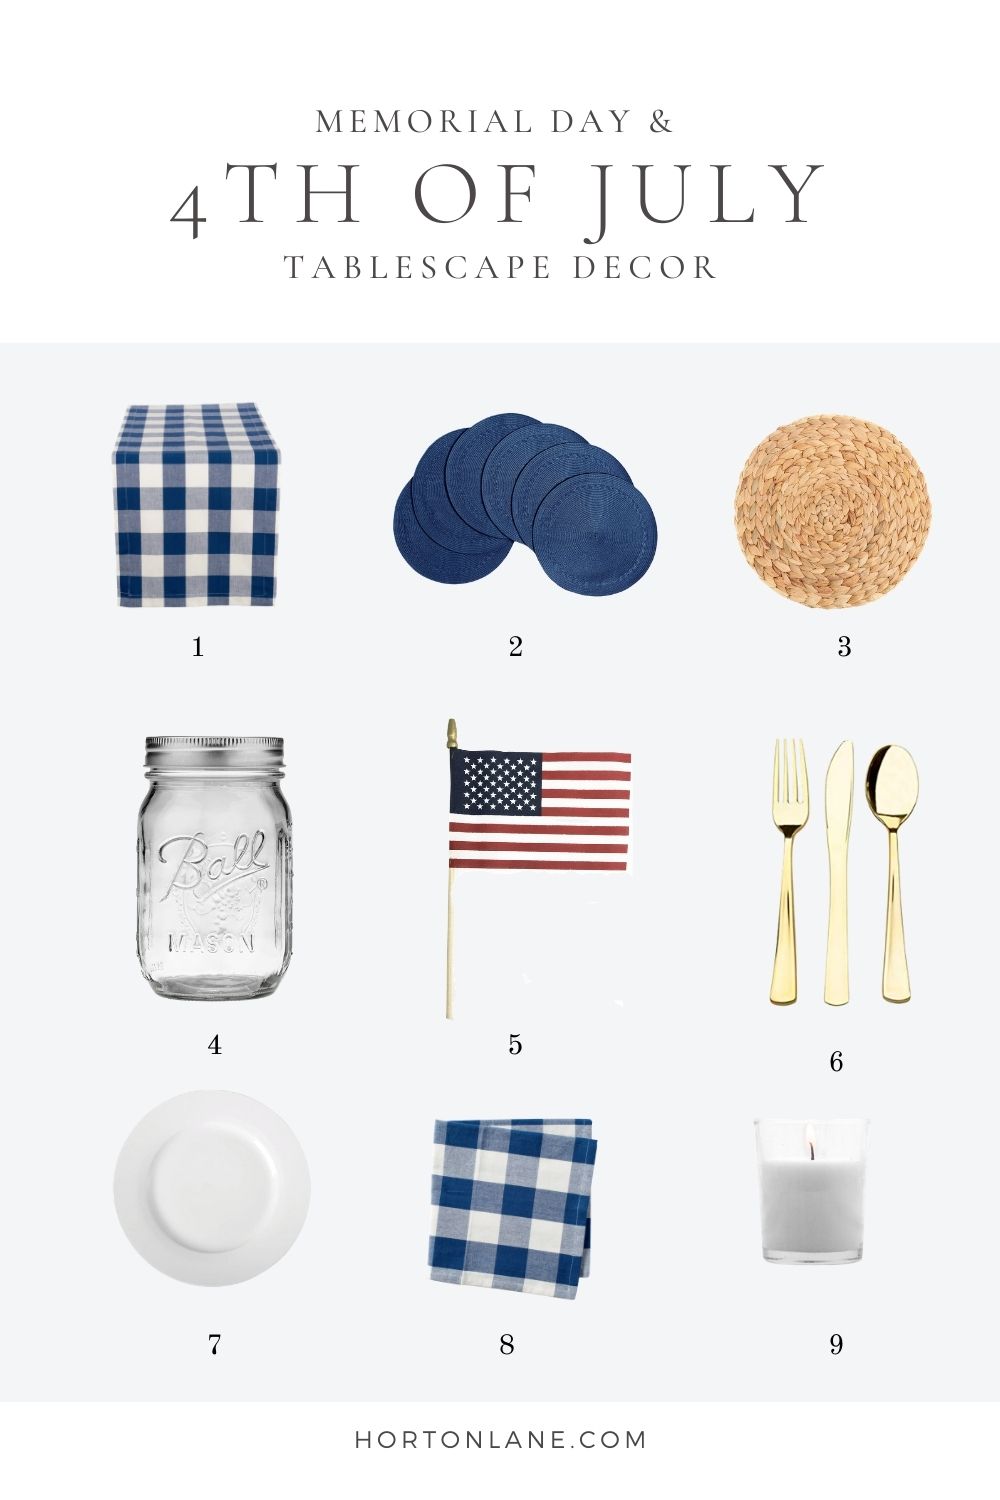 Pinterest Pin-4th of July Memorial Day Tablescape table decor summer bbq decor